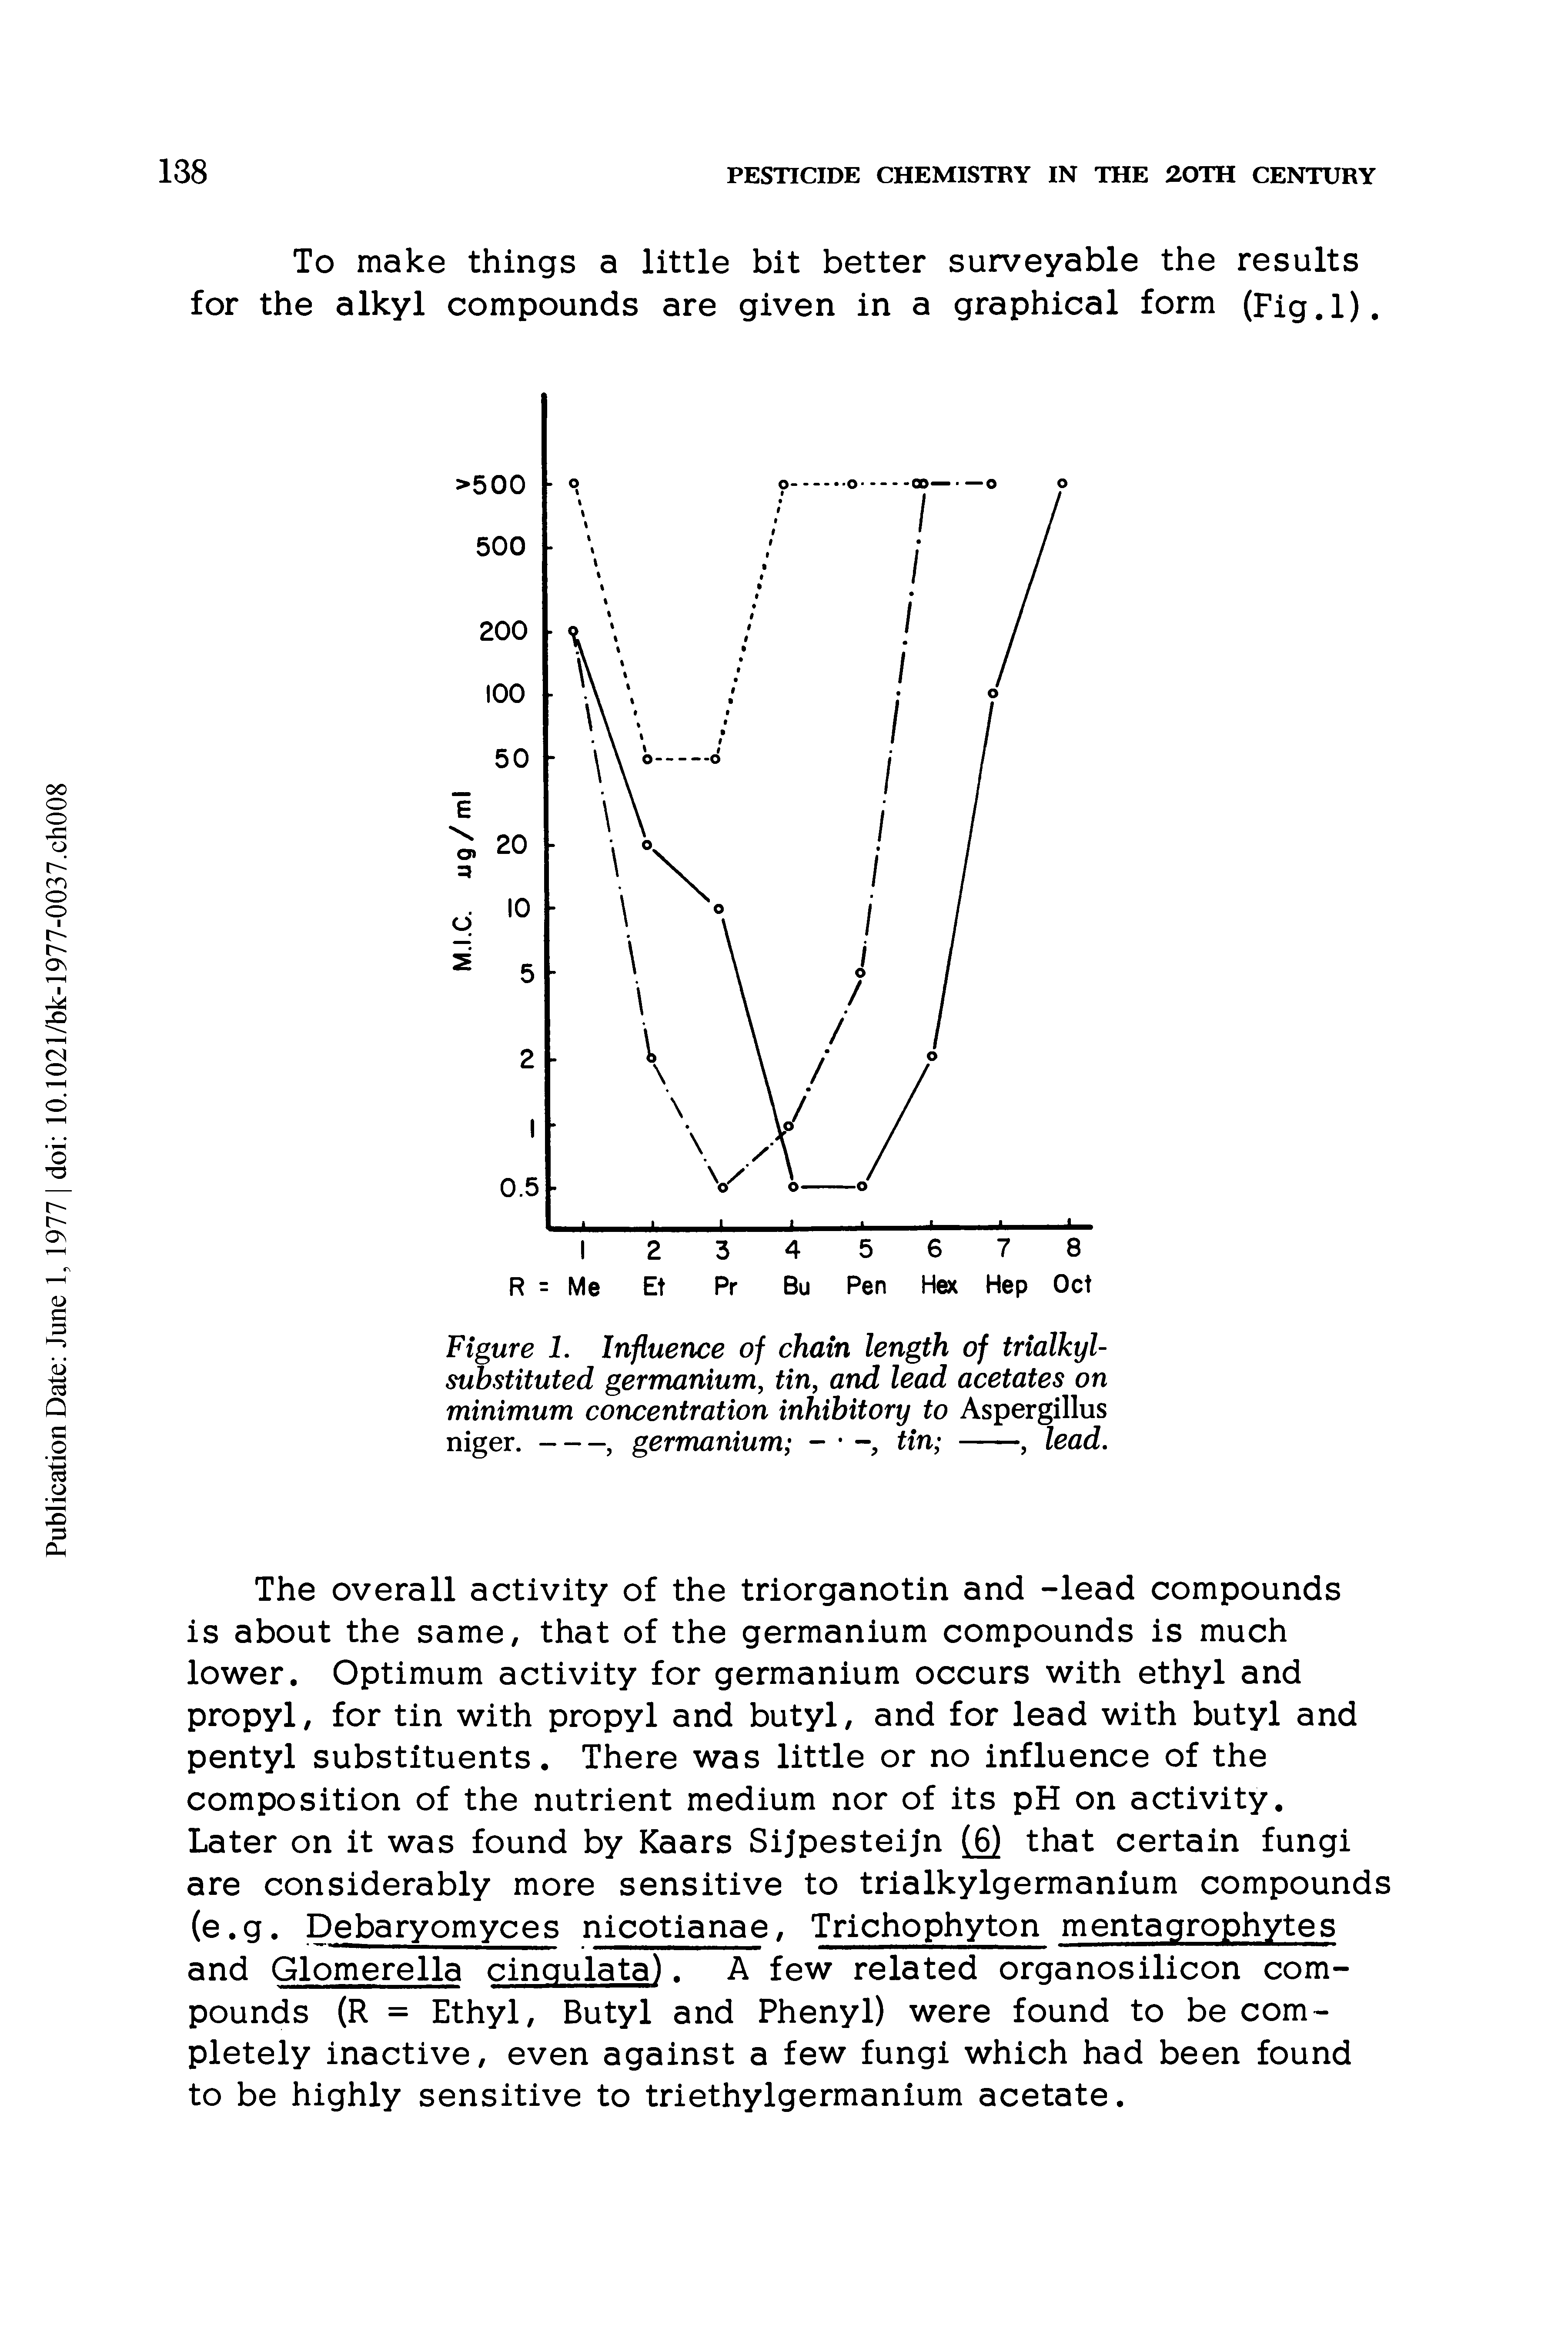 Figure 1. Influence of chain length of trialkyl-substituted germanium, tin, and lead acetates on minimum concentration inhibitory to Aspergillus niger.------, germanium - tin --------, lead.